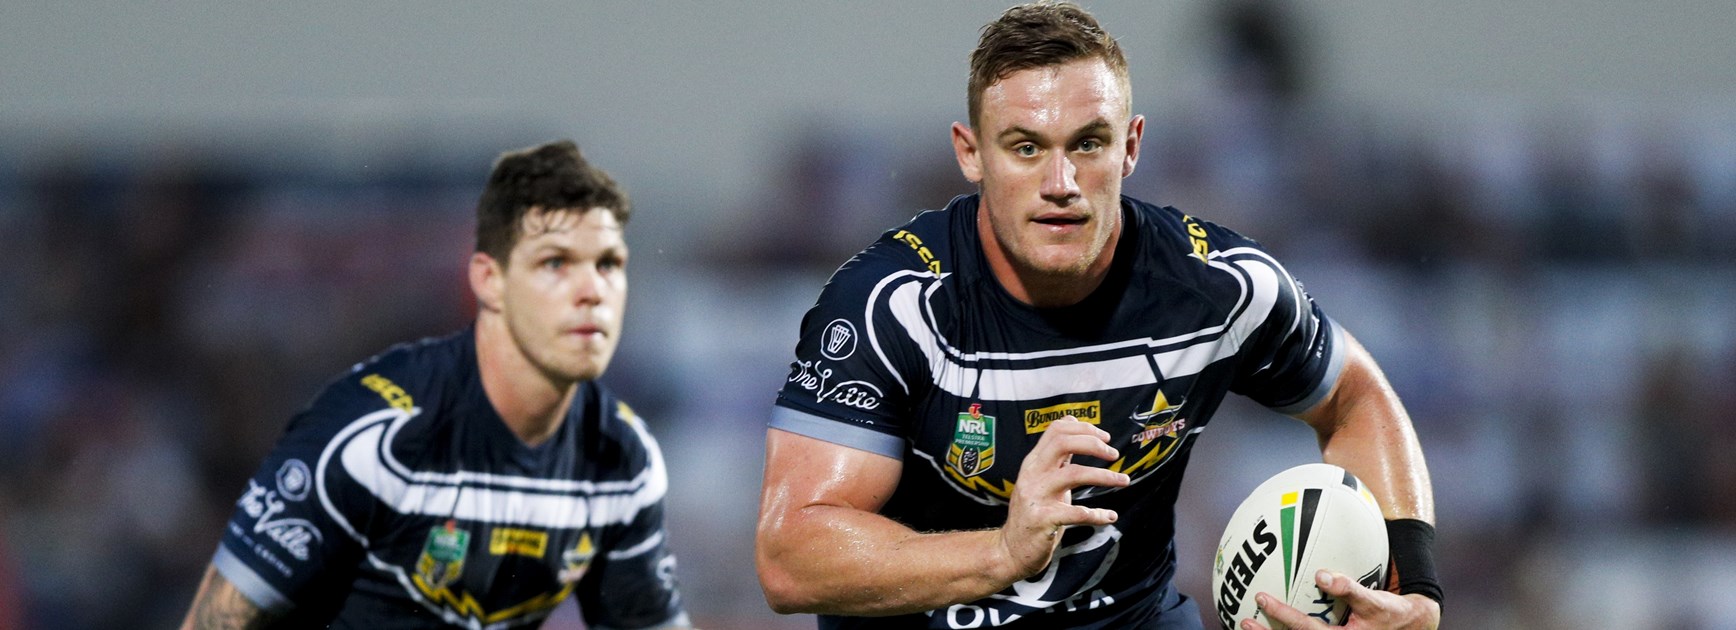 Hess extends stay with Cowboys